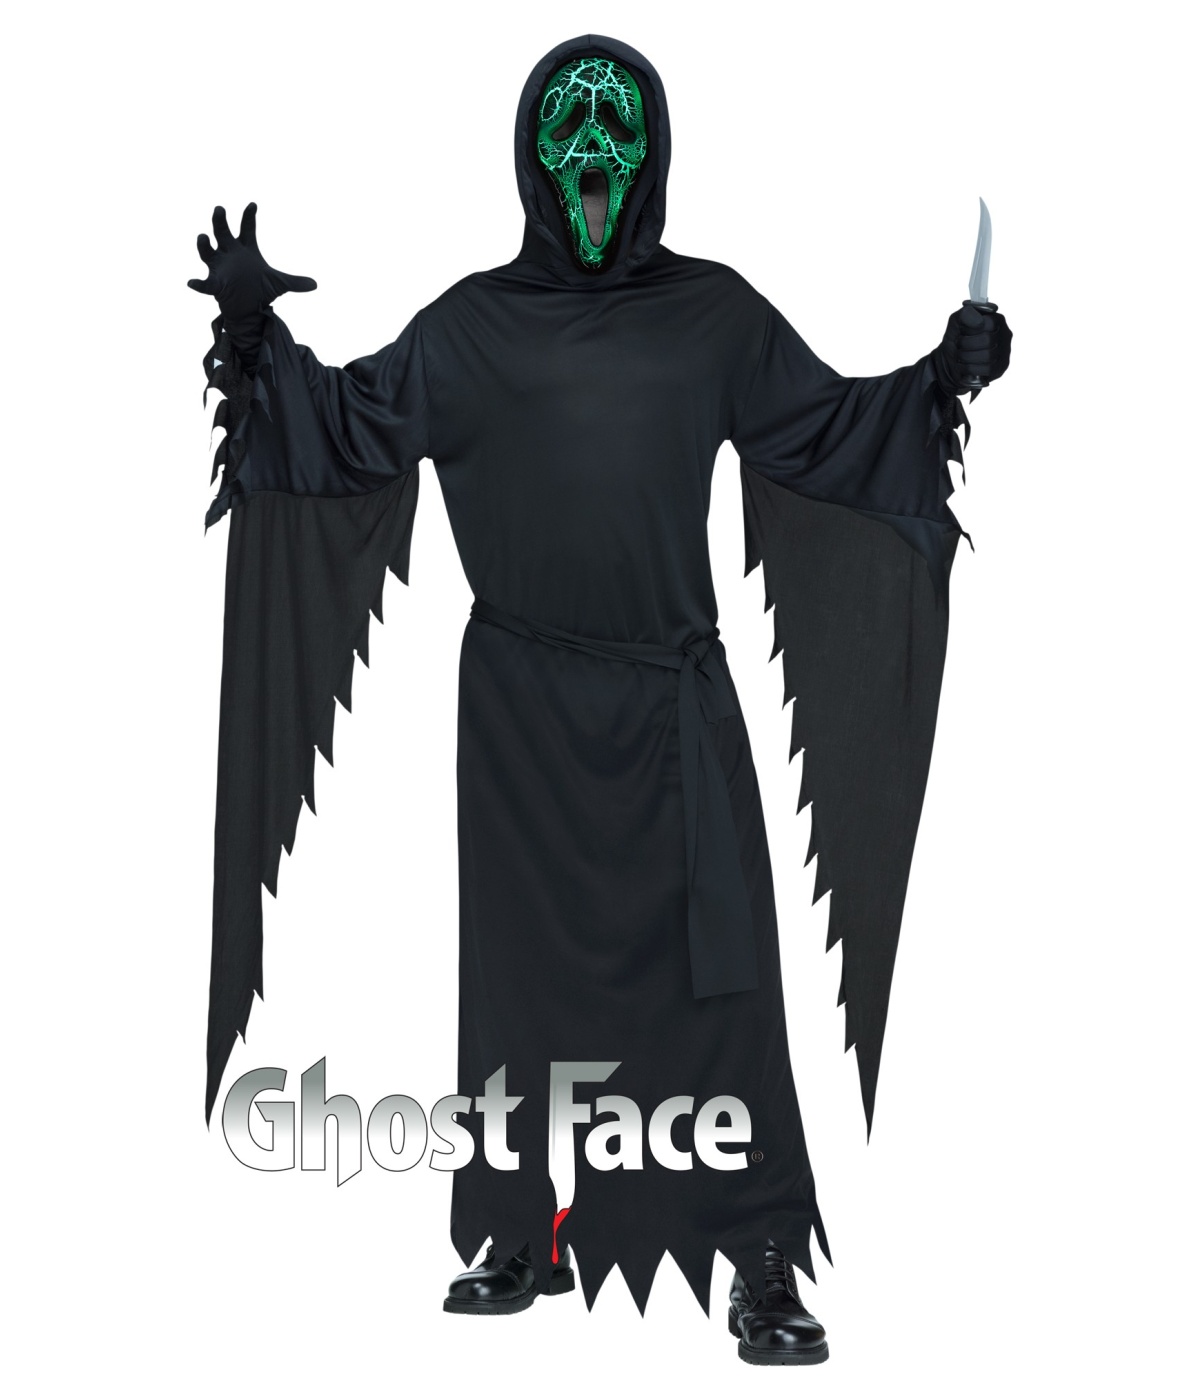  Mens Ghost Face Costume